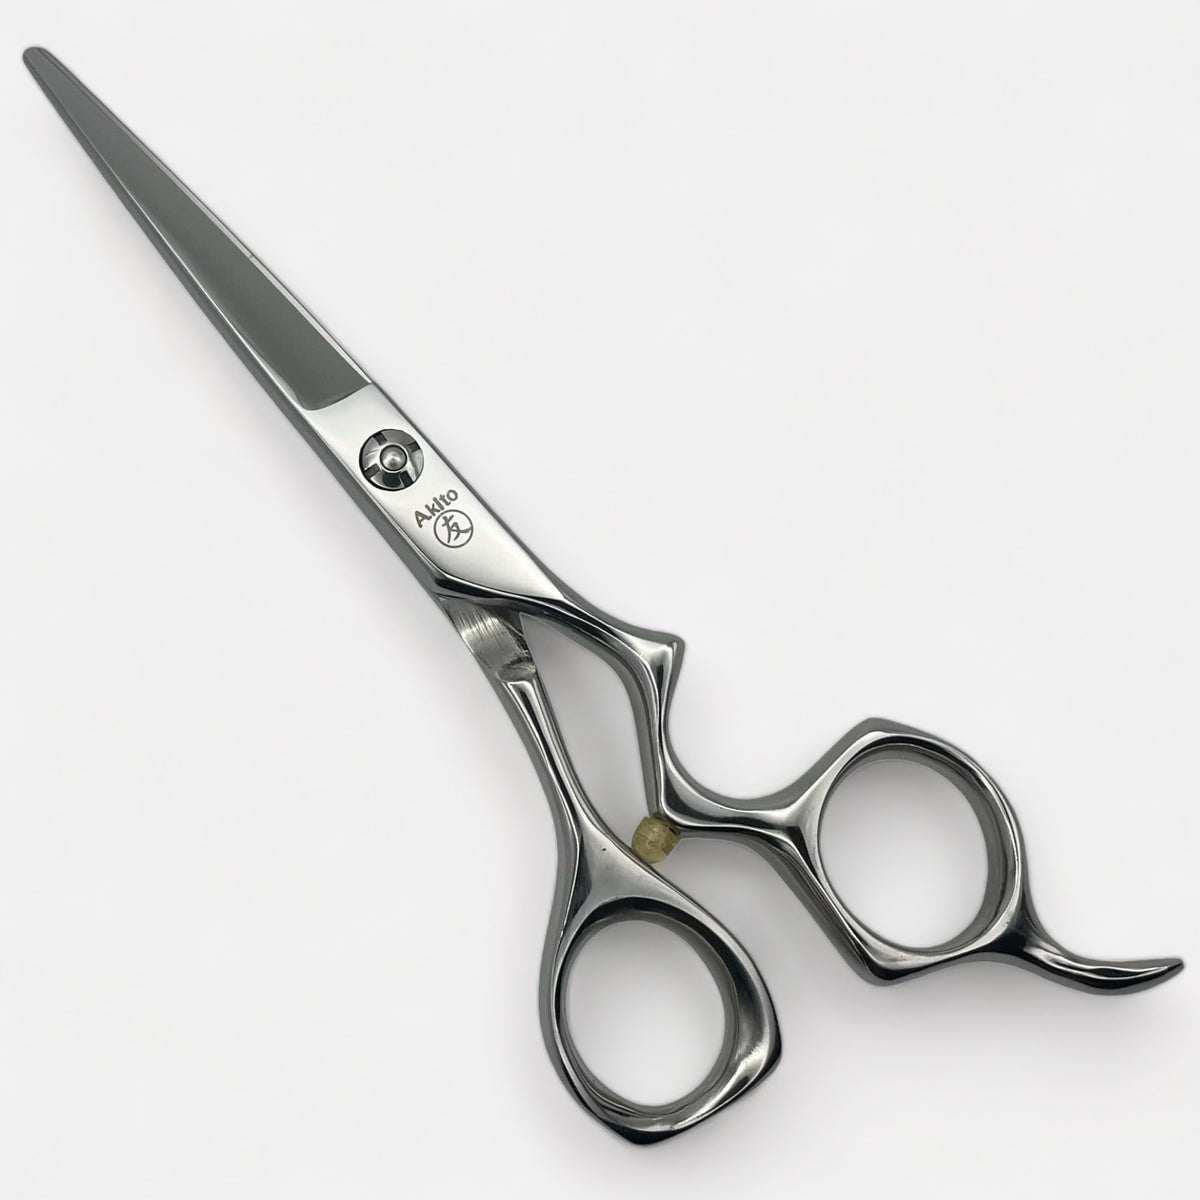 X-8 Silver Hair Scissors Side Angle